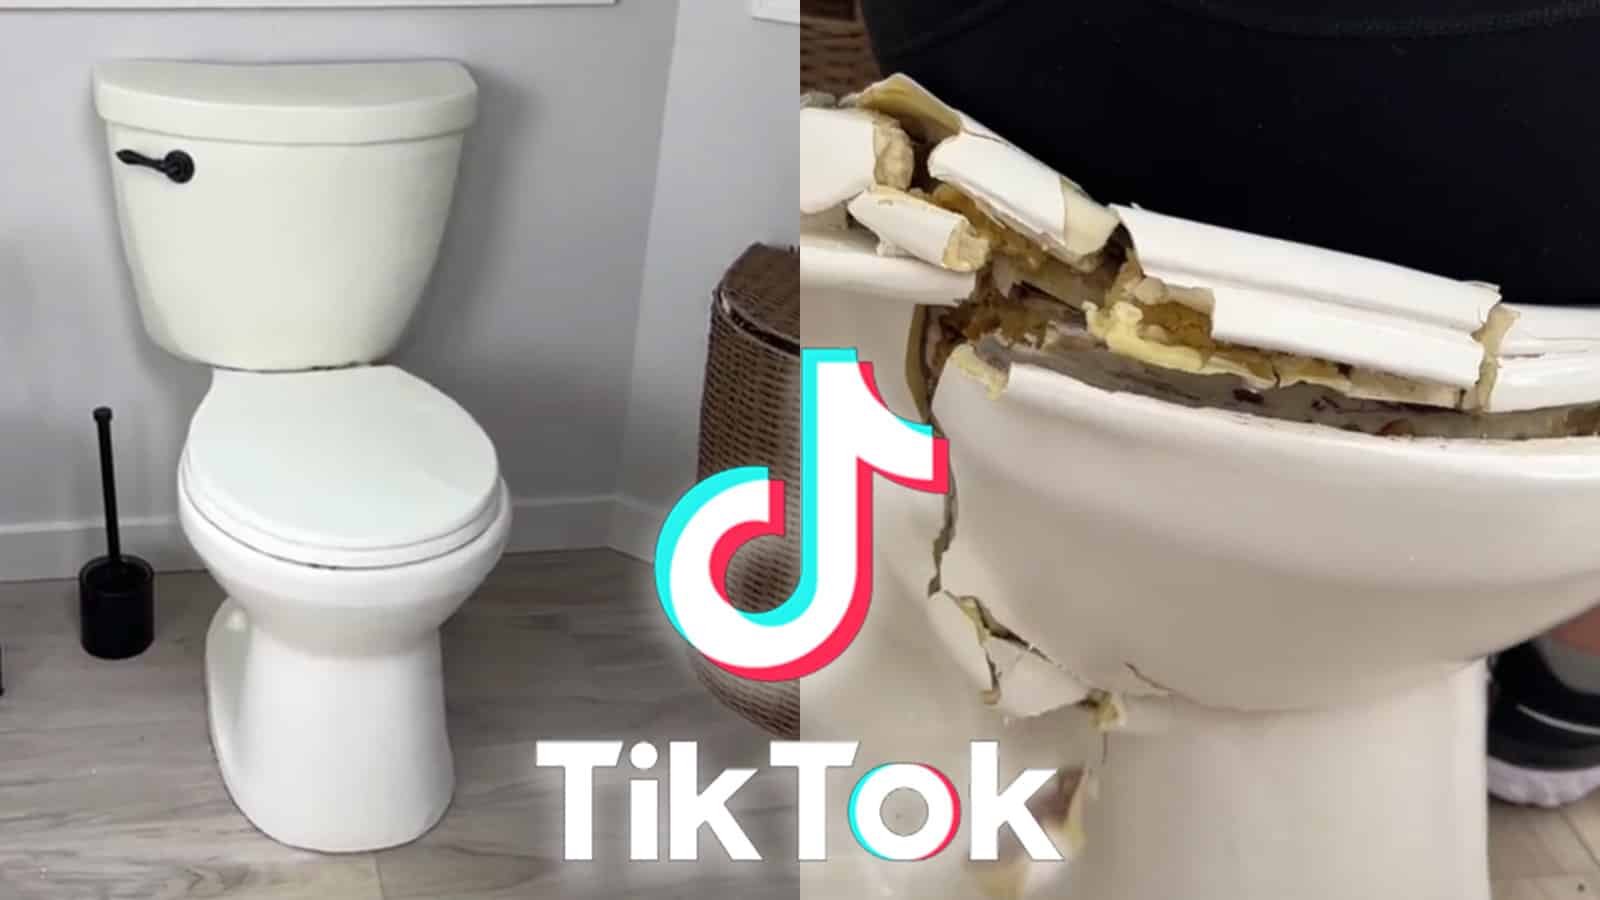 TikToker reveals what happened after MrBeast “stole” her toilet ...